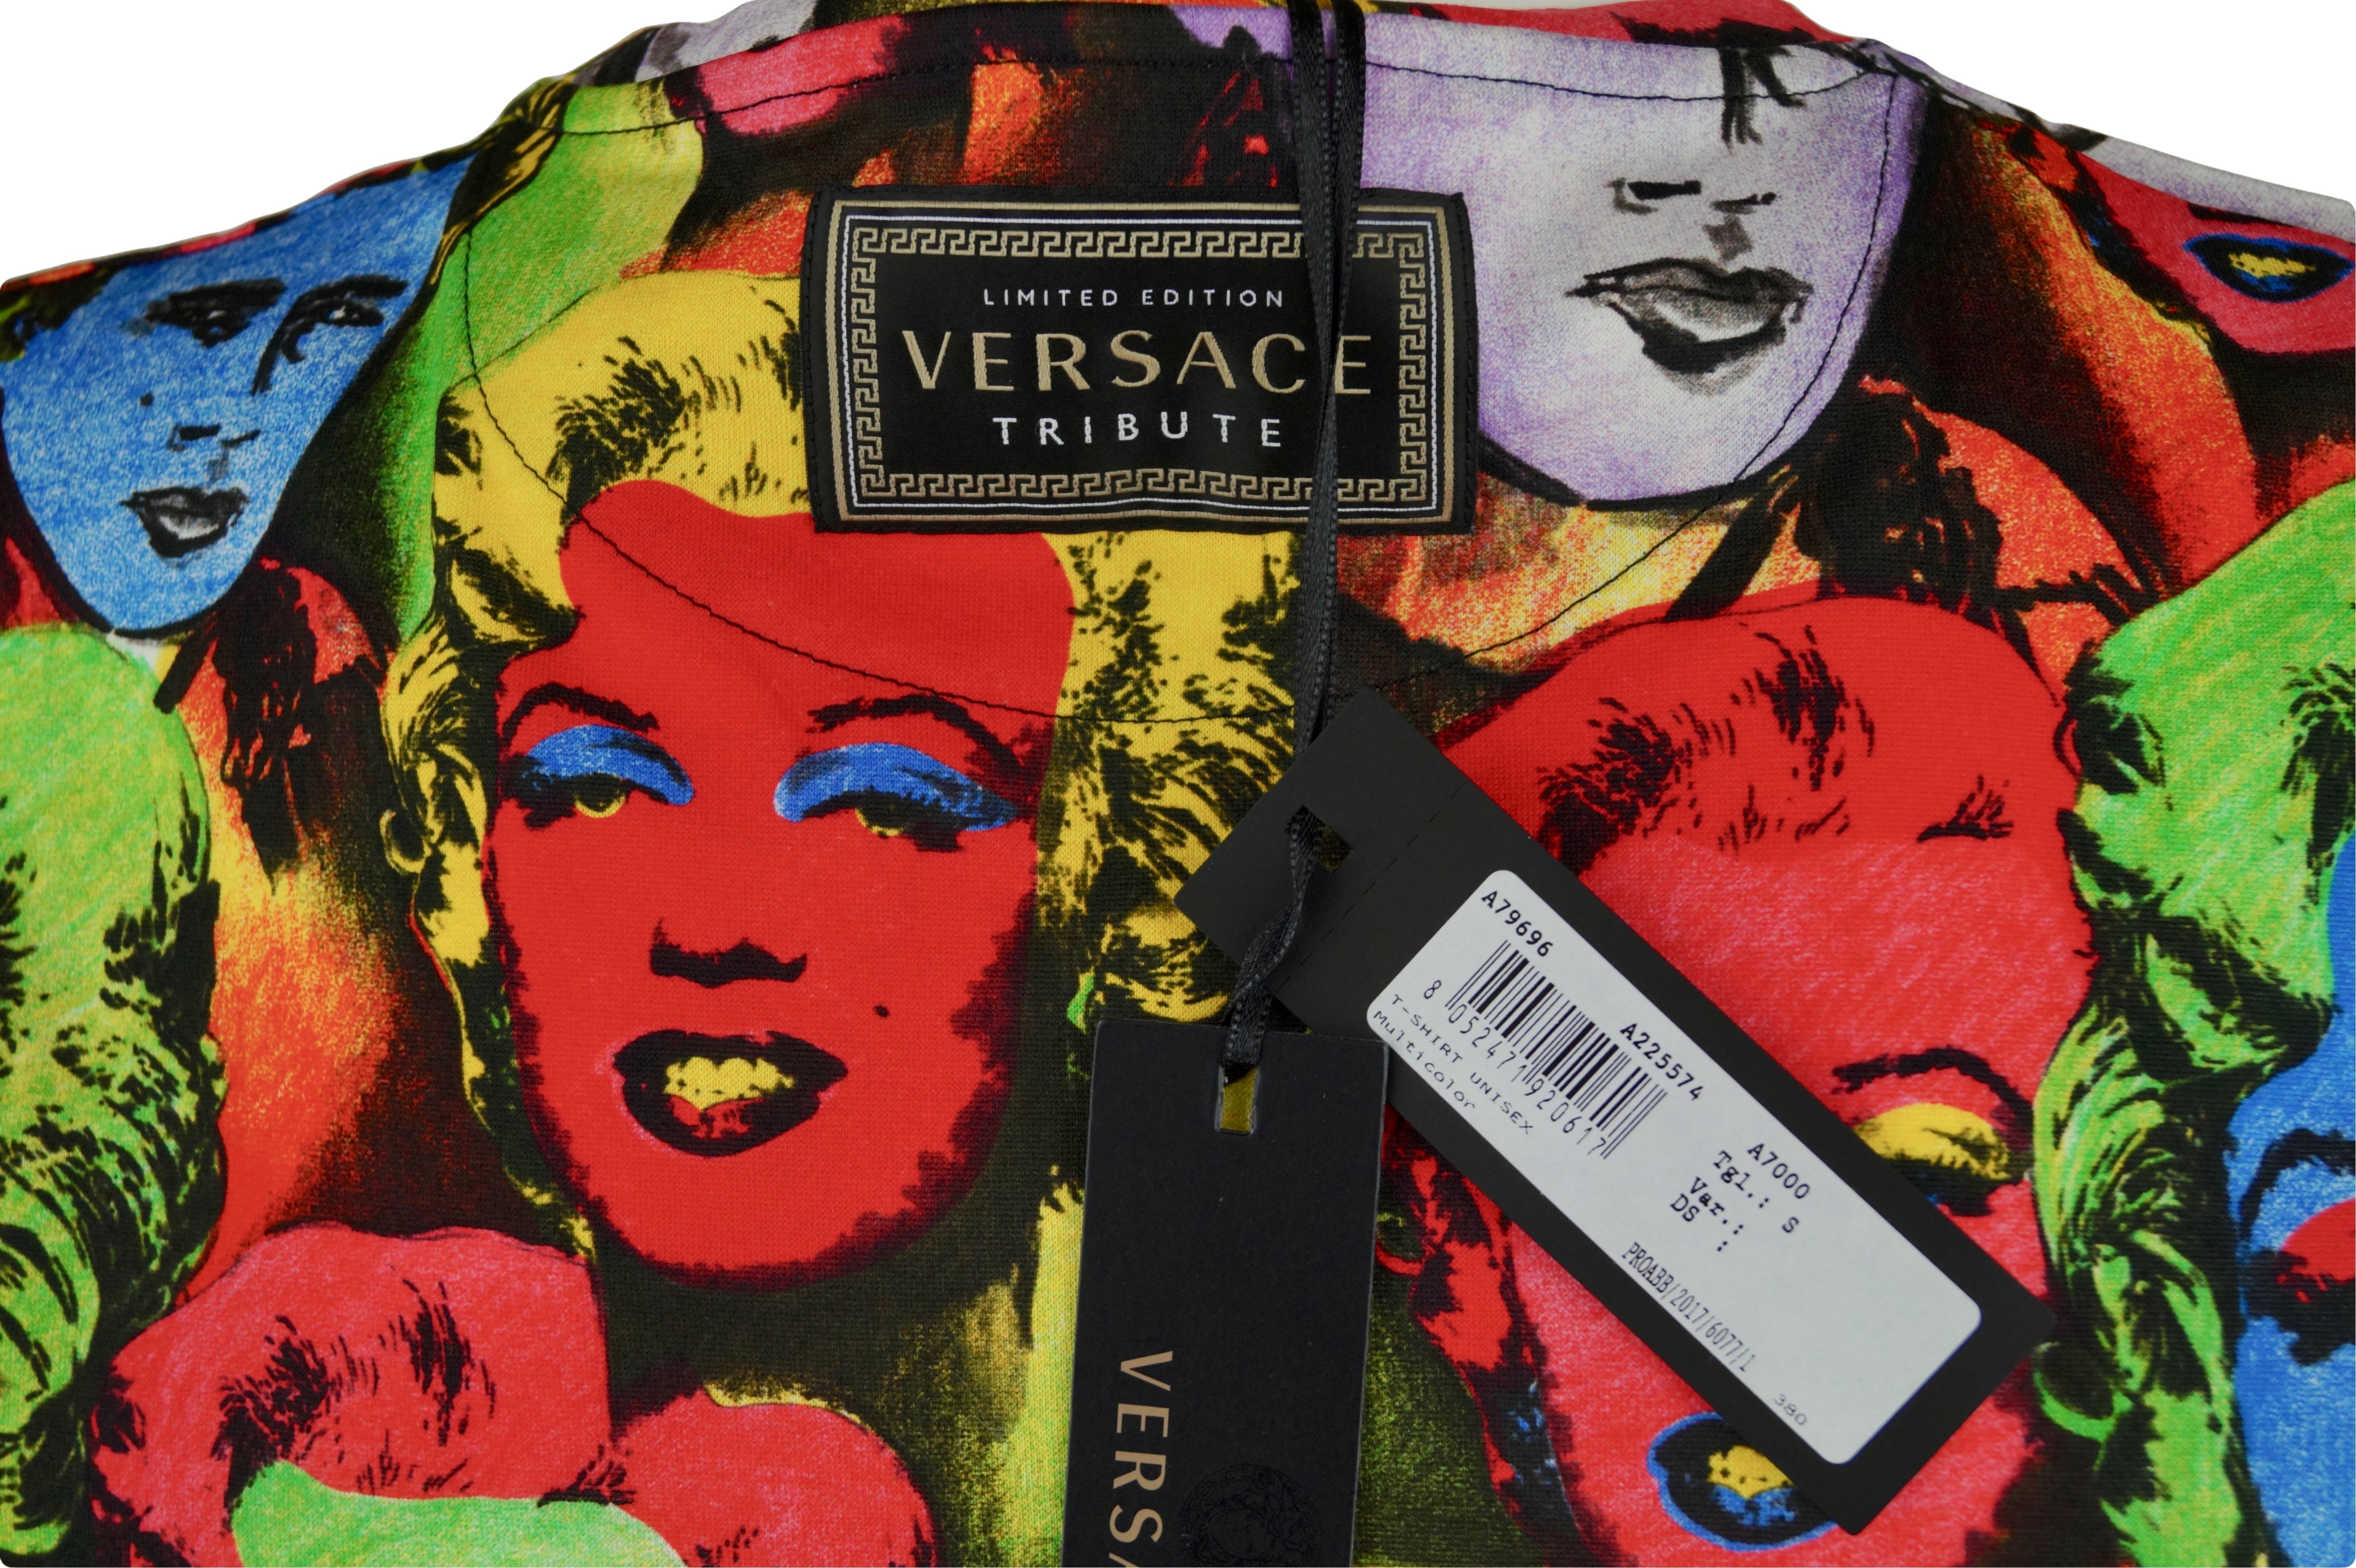 VERSACE Tribute 2017 Warhol SS 1991 Marilyn Monroe and James Dean T-shirt For Sale 1